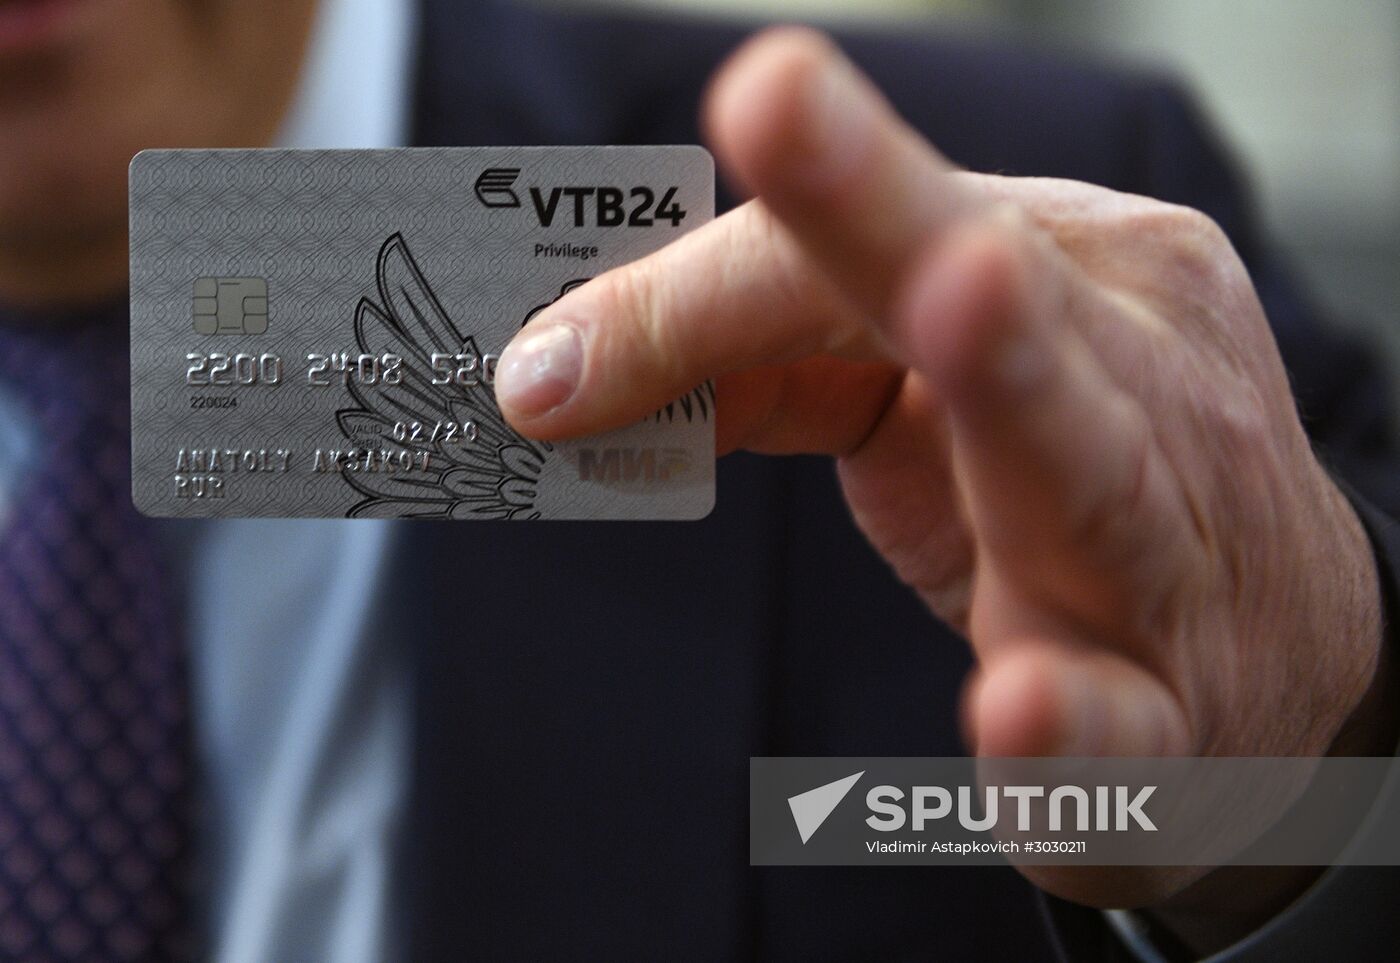 Deputy Anatoly Aksakov presented with Mir card issued by VTB24